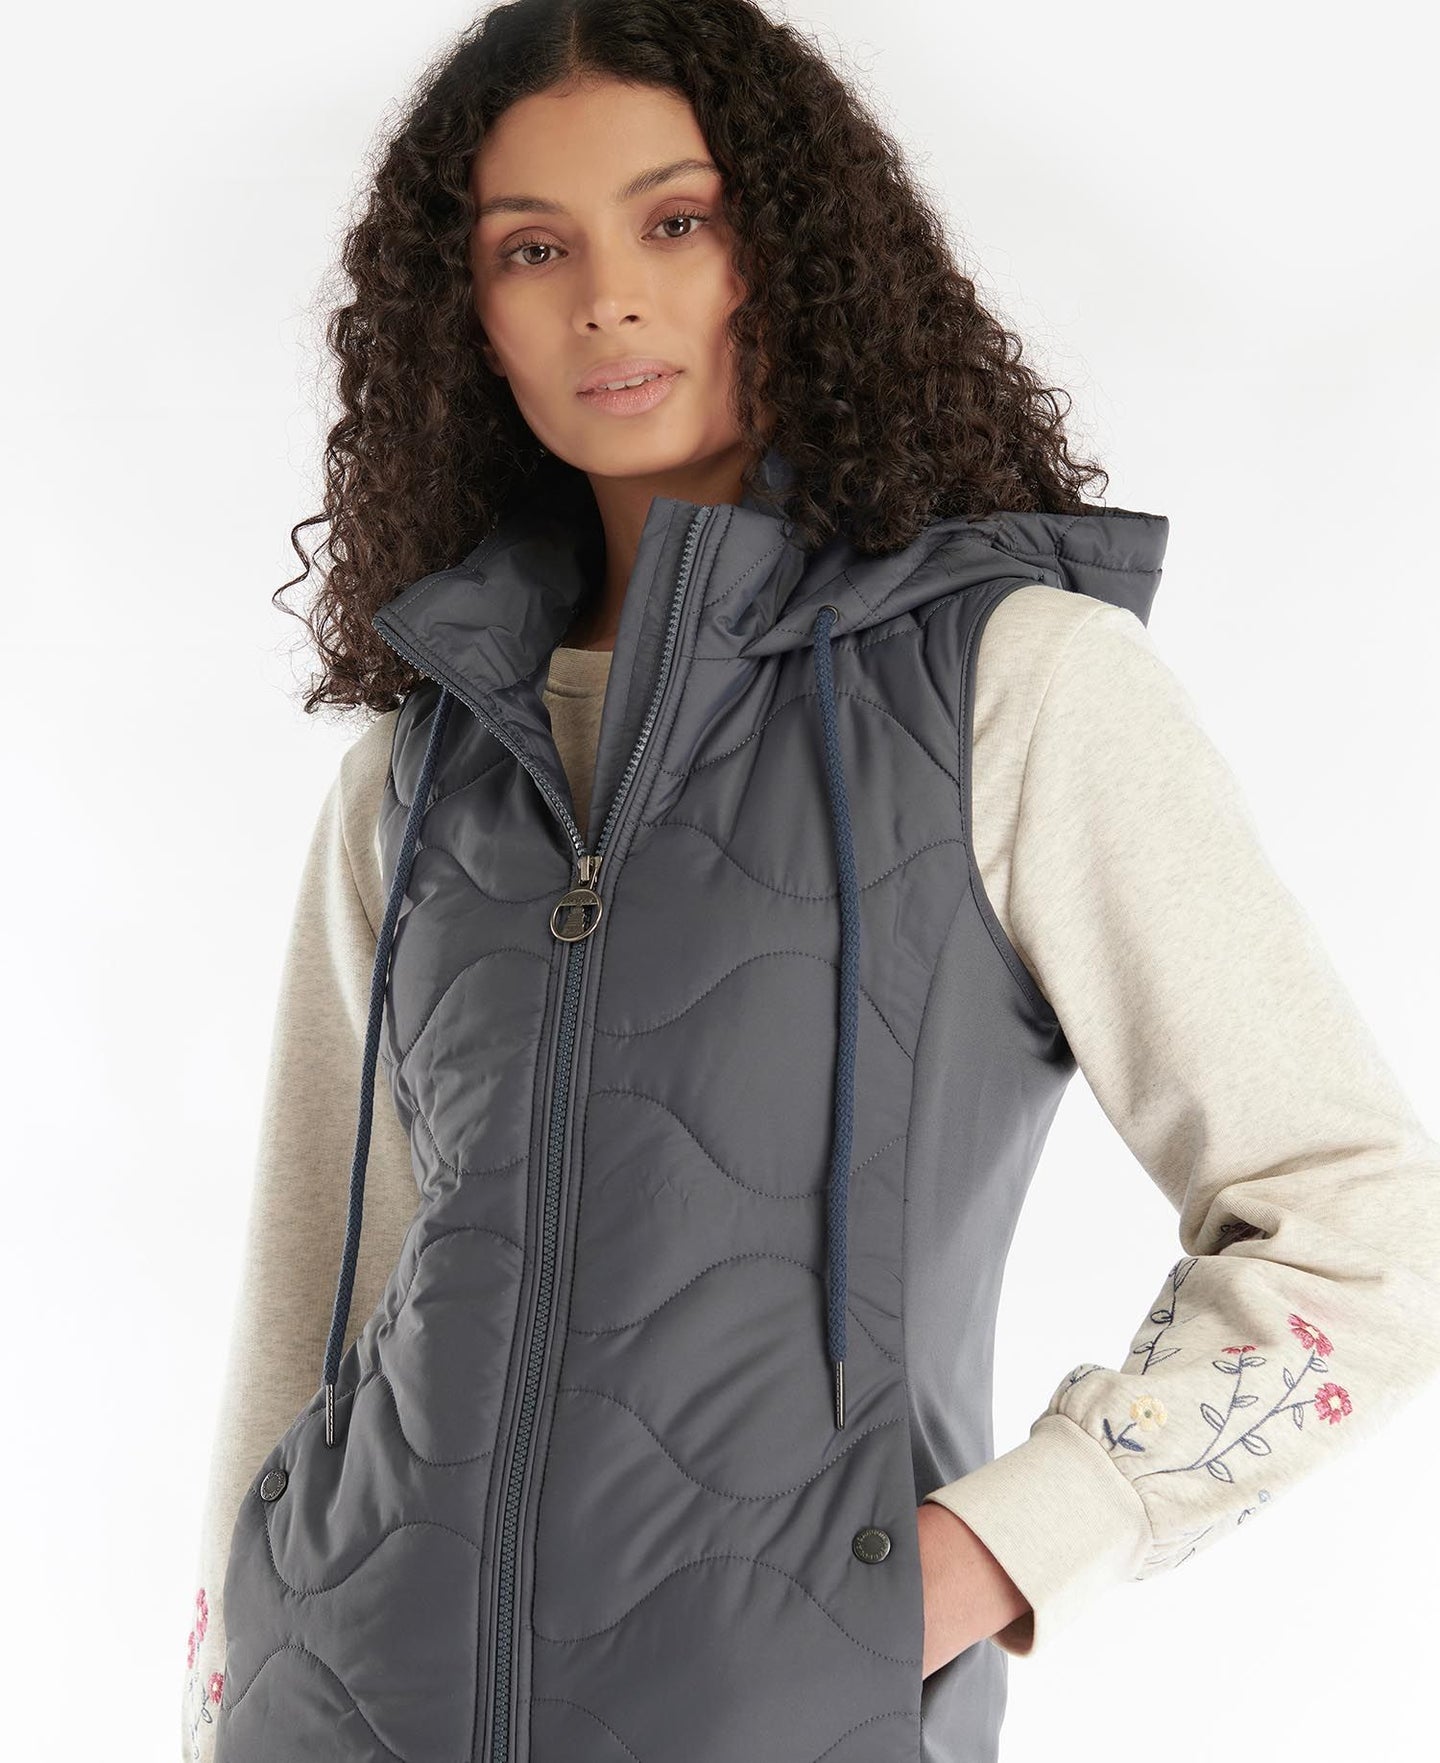 Barbour Thrift Gilet Quilted Sweat